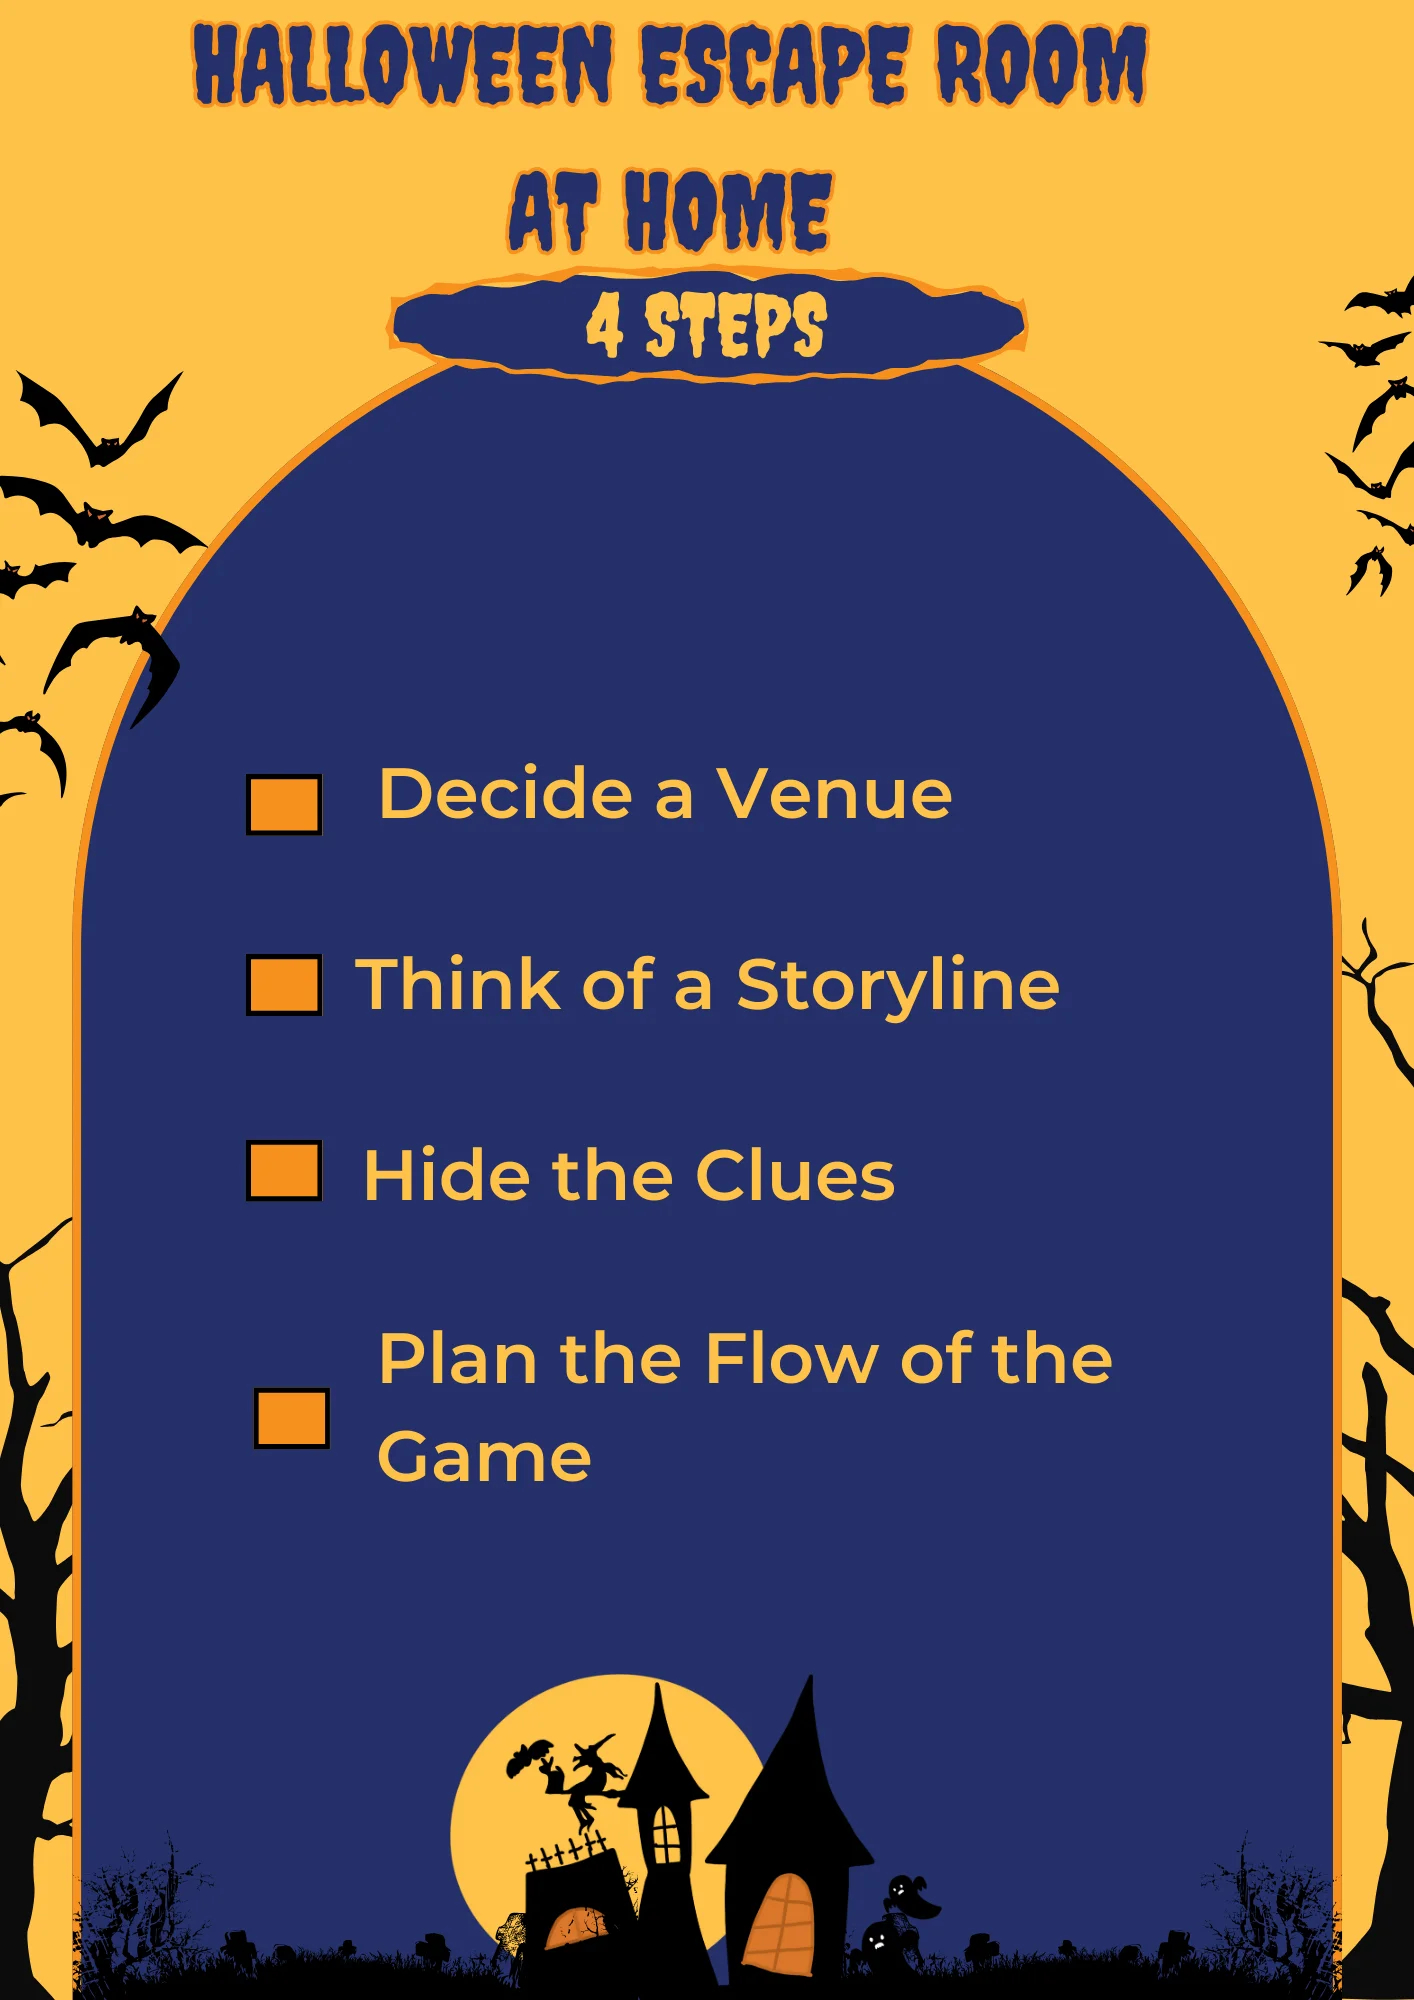 An infographic on halloween escape room at home